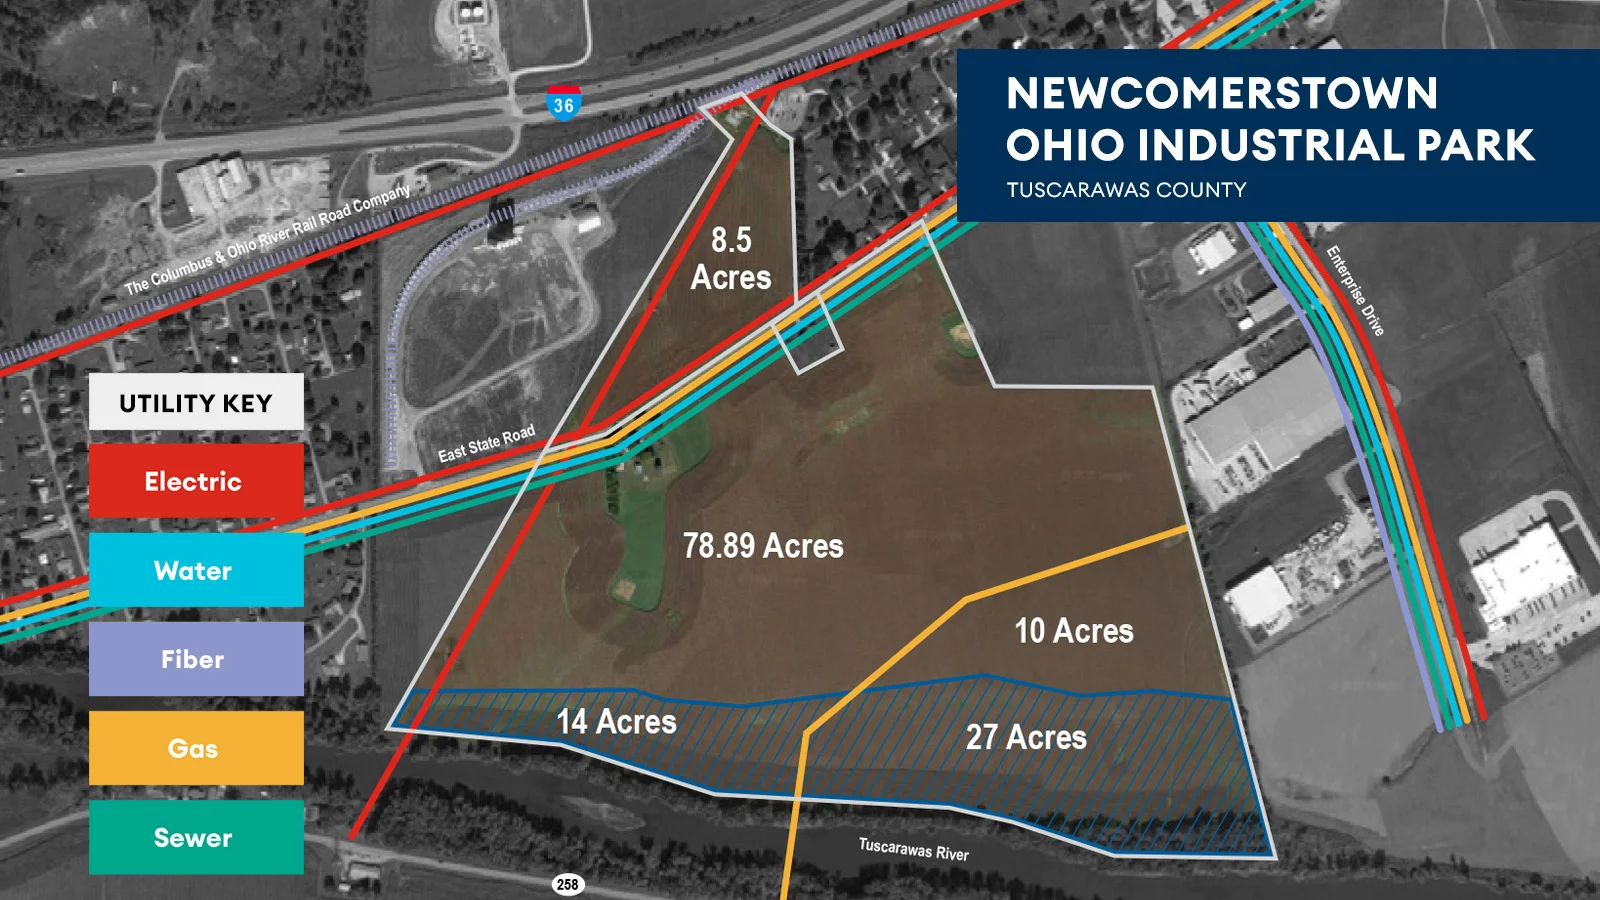 Newcomerstown Industrial Park Utility Map